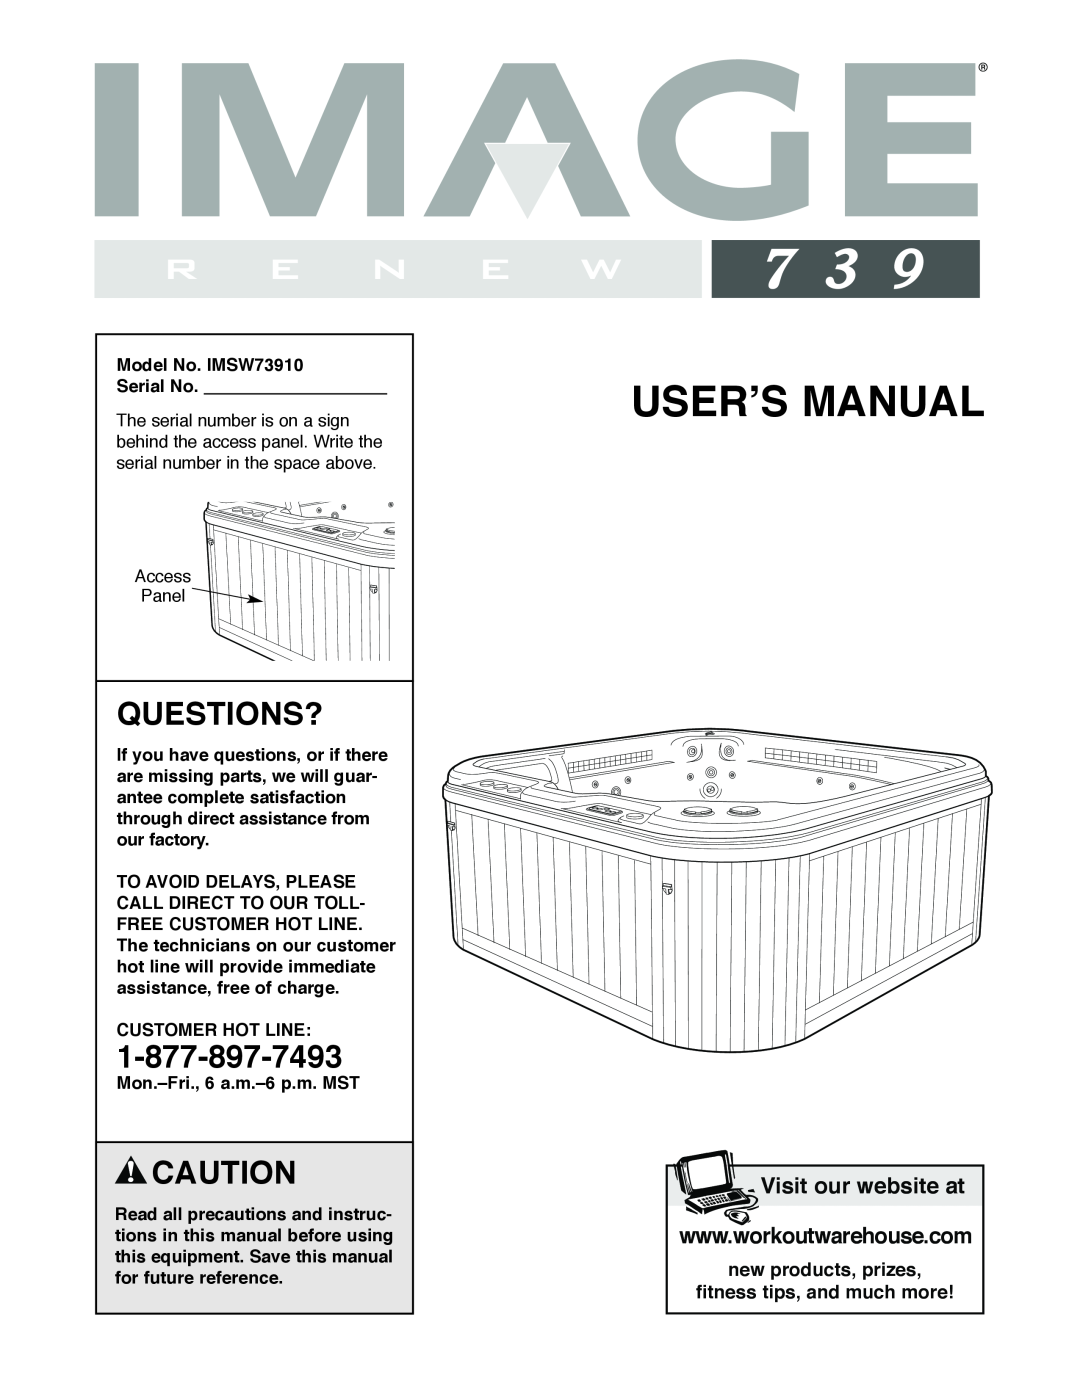 Image IMSW73910 user manual Questions?, 1-877-897-7493, User’S Manual, new products, prizes fitness tips, and much more 